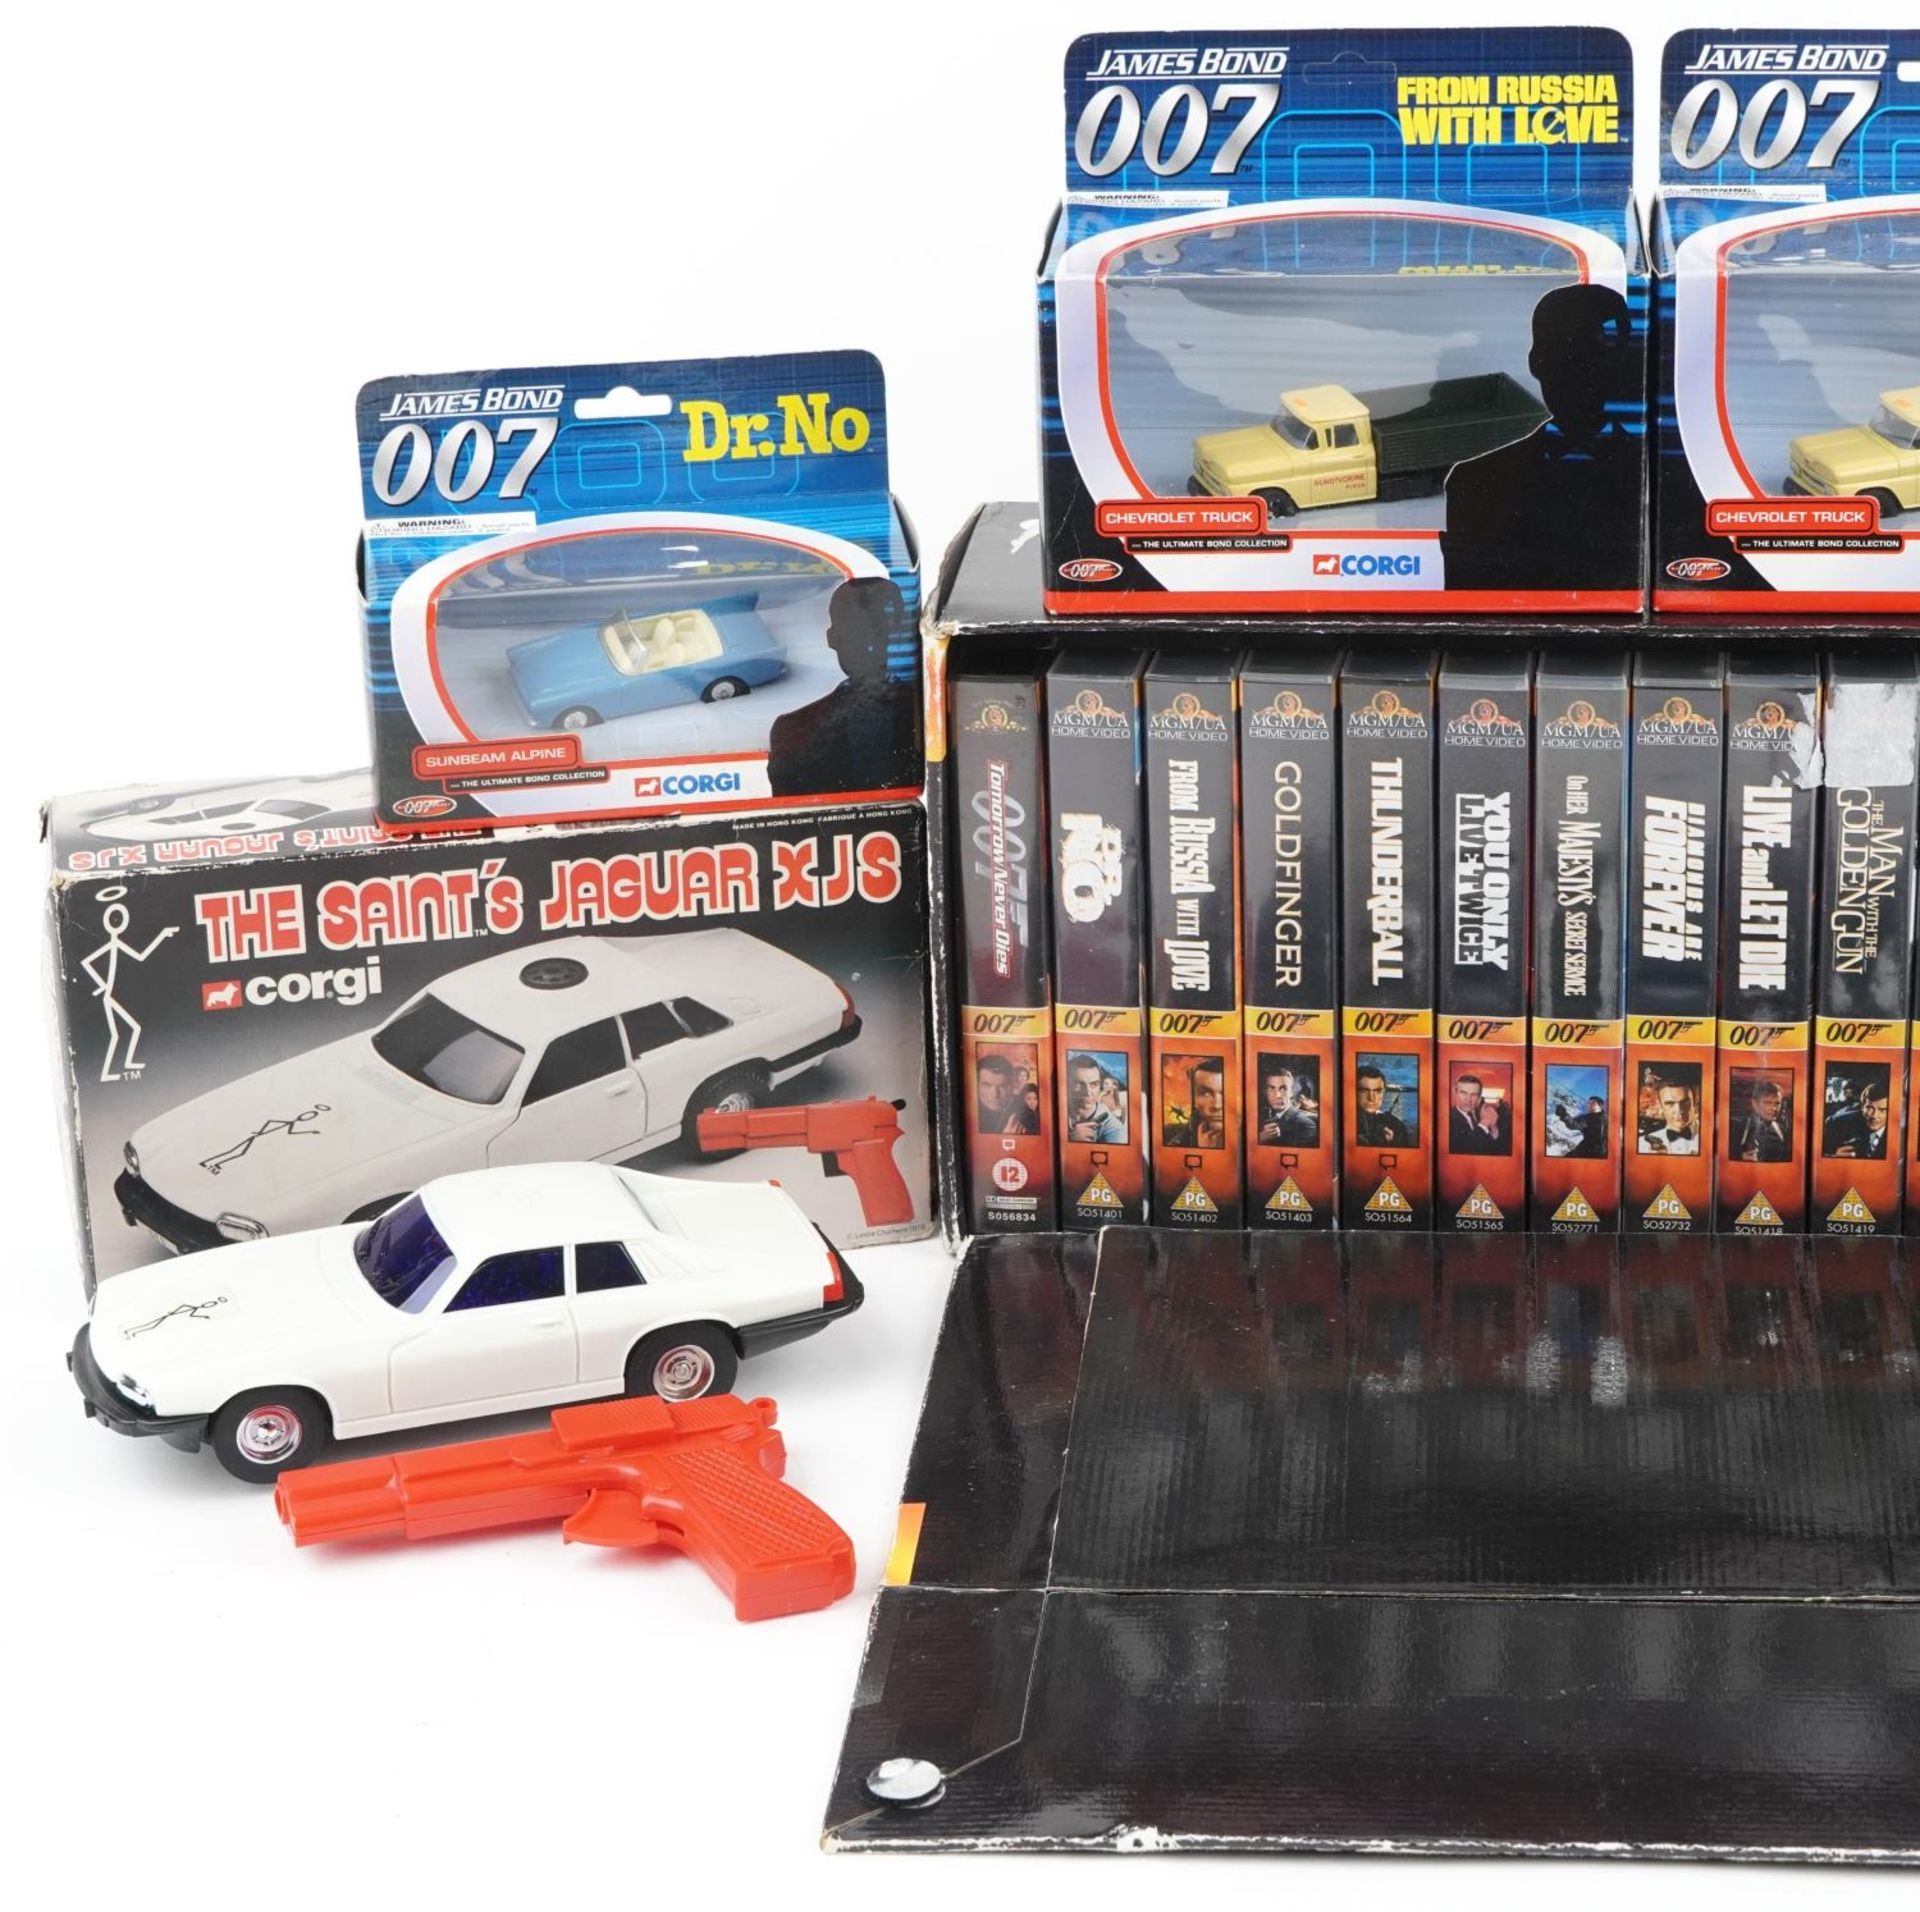 Vintage and later James Bond 007 toys and collectables including Corgi diecast figures with boxes, - Image 2 of 3